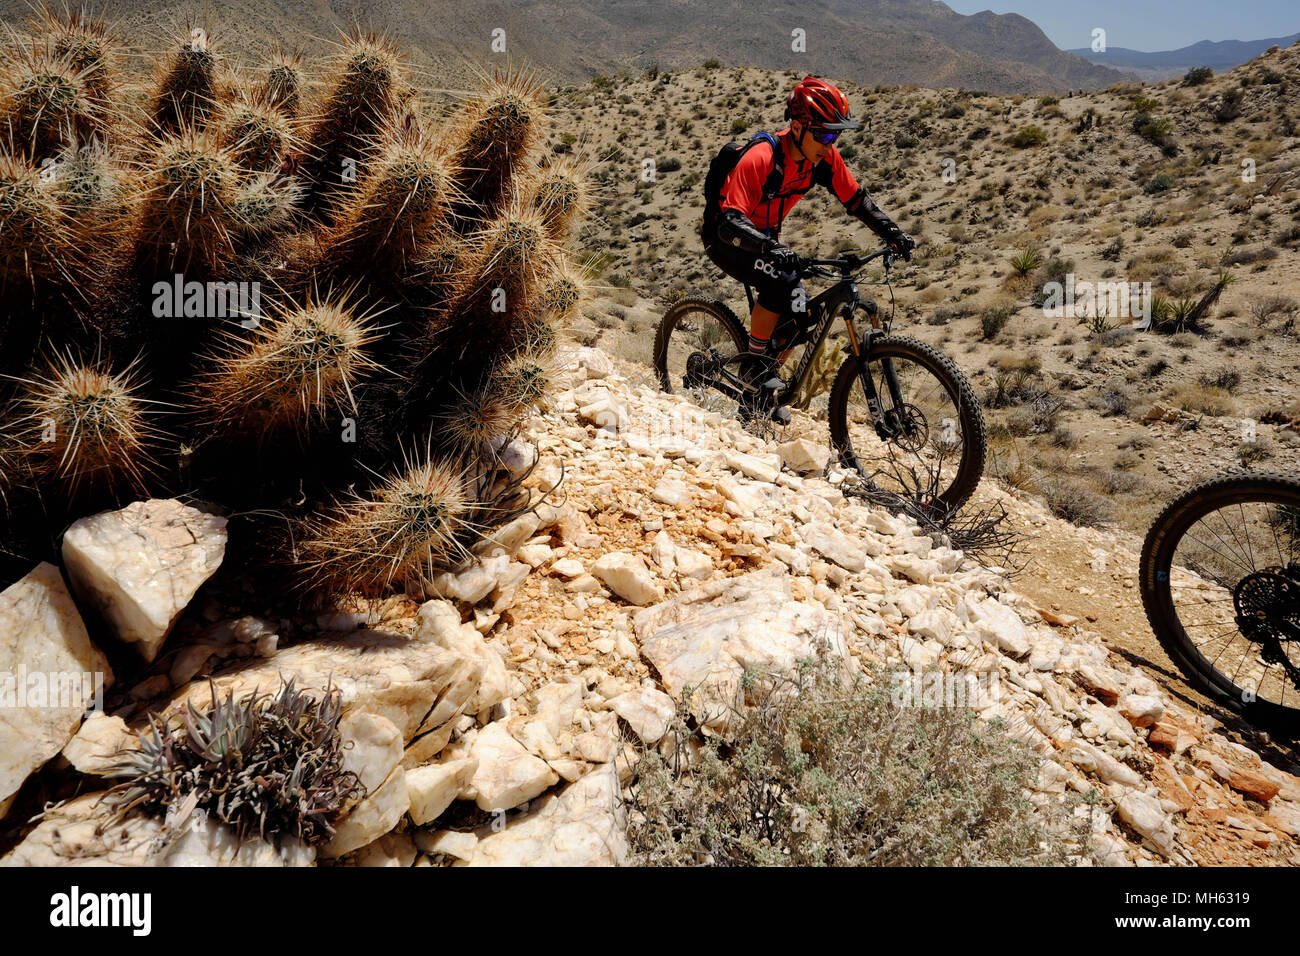 Palm Springs, California, USA. 28th Apr, 2018. Mountain bikers pass cactus and white quartz rocks on the trail. This is a true Southern California Epic mountain bike ride in the Santa Rosa and San Jacinto Mountains National Monument. Offering huge vistas, off-camber narrow single track, ridges, stream beds, rocks, sand, cactus. This point-to-point route passes a varied array of high desert trails from the foot of the north slope of Santa Rosa Mountains and Agua Caliente Indian Reservation at 4500 feet down to Palm Springs 29 miles away at 500 feet. (Credit Image: © Ruaridh Stewart via ZUMA Wi Stock Photo